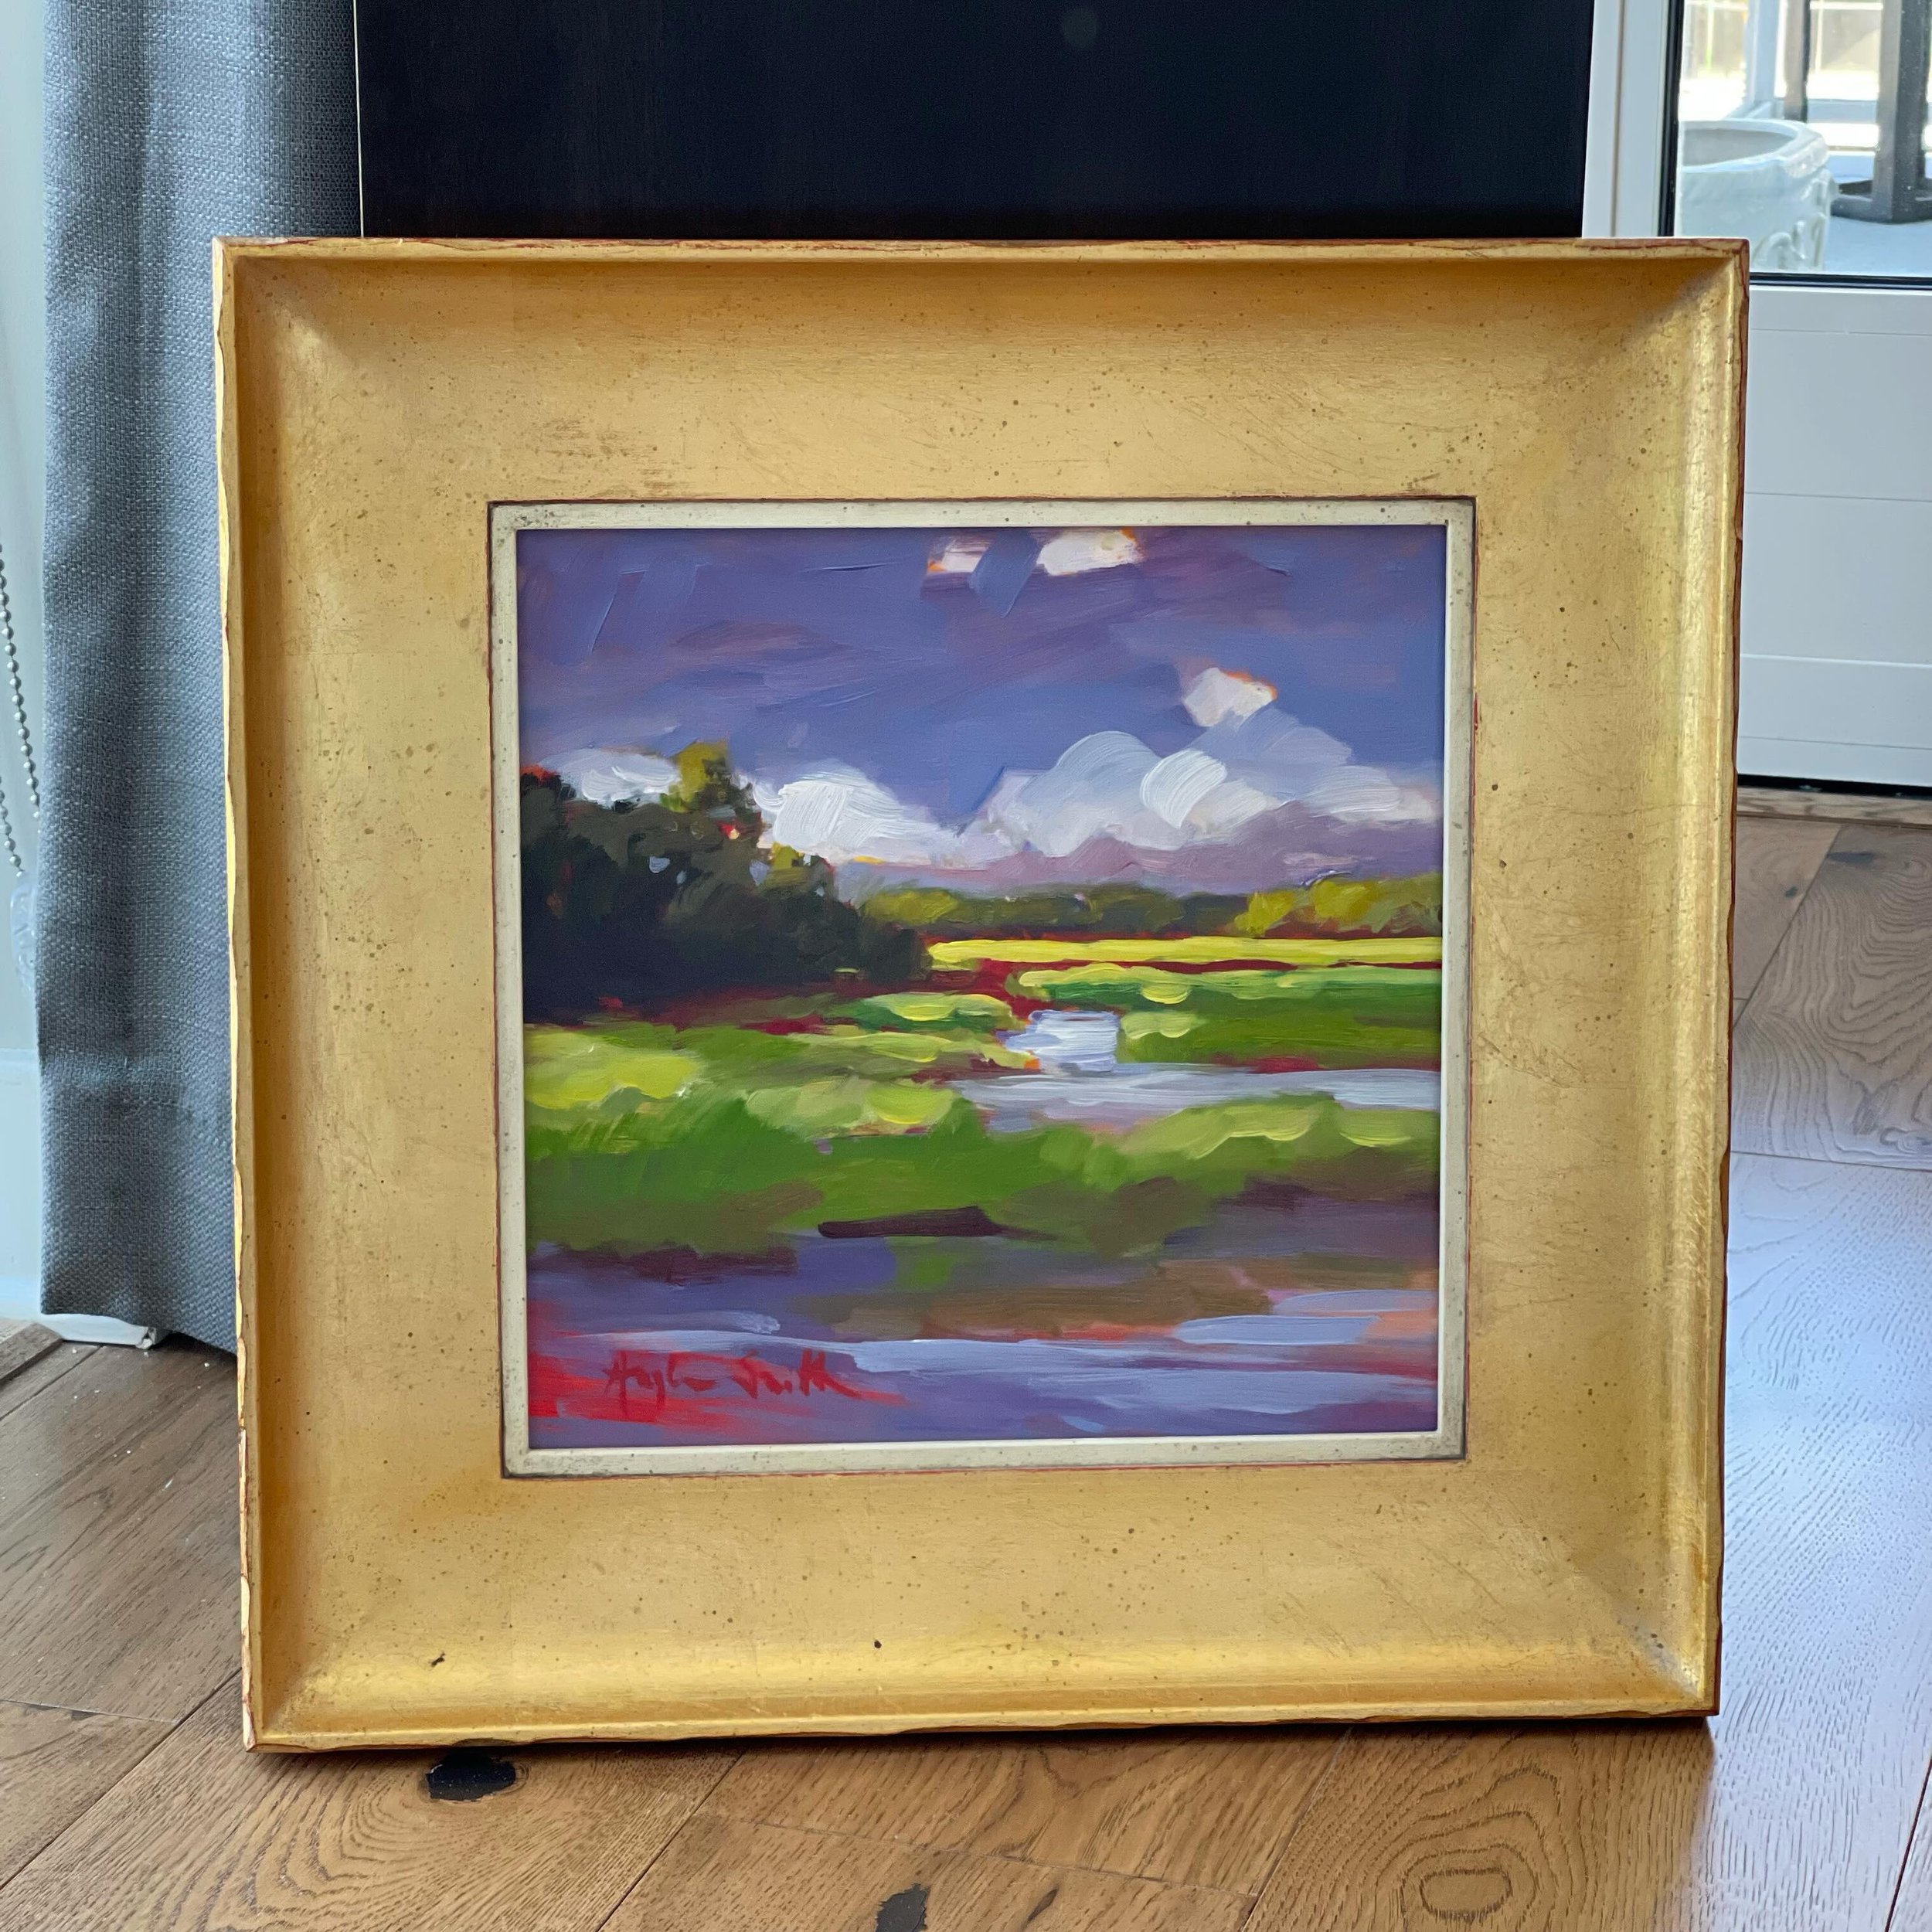 &ldquo;Sunny Marshlands&rdquo; by Betty Anglin Smith, 2013
.
.
.
.
.
#bettyanglinsmith
#lowcountrylandscapes
#charlestonartists
#artmakestheroom 
#buyrealart 
#colorfulhome 
#chairishbydesign 
#gonegirlhome